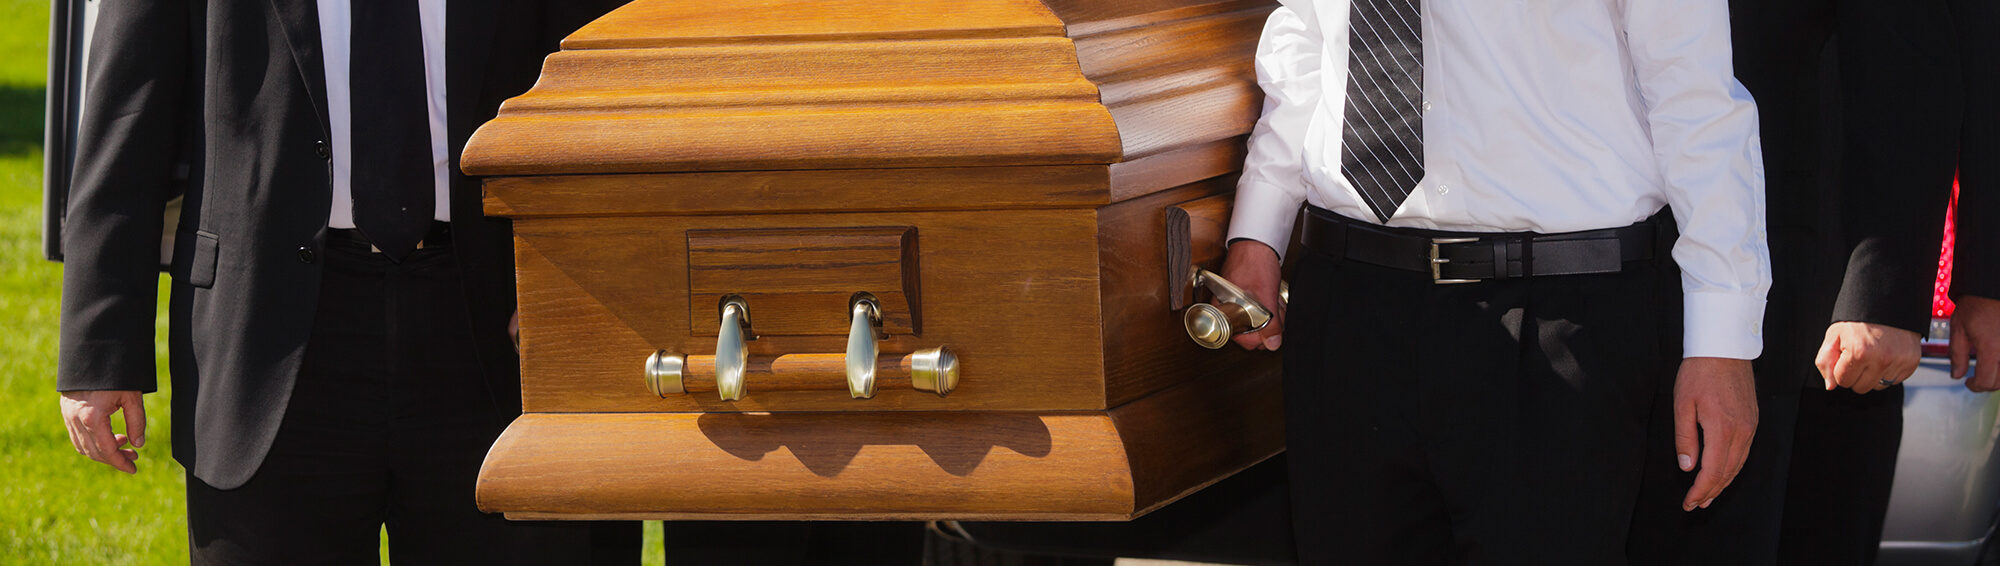 Do You Have a Wrongful Death Claim after the Loss of a Loved One?